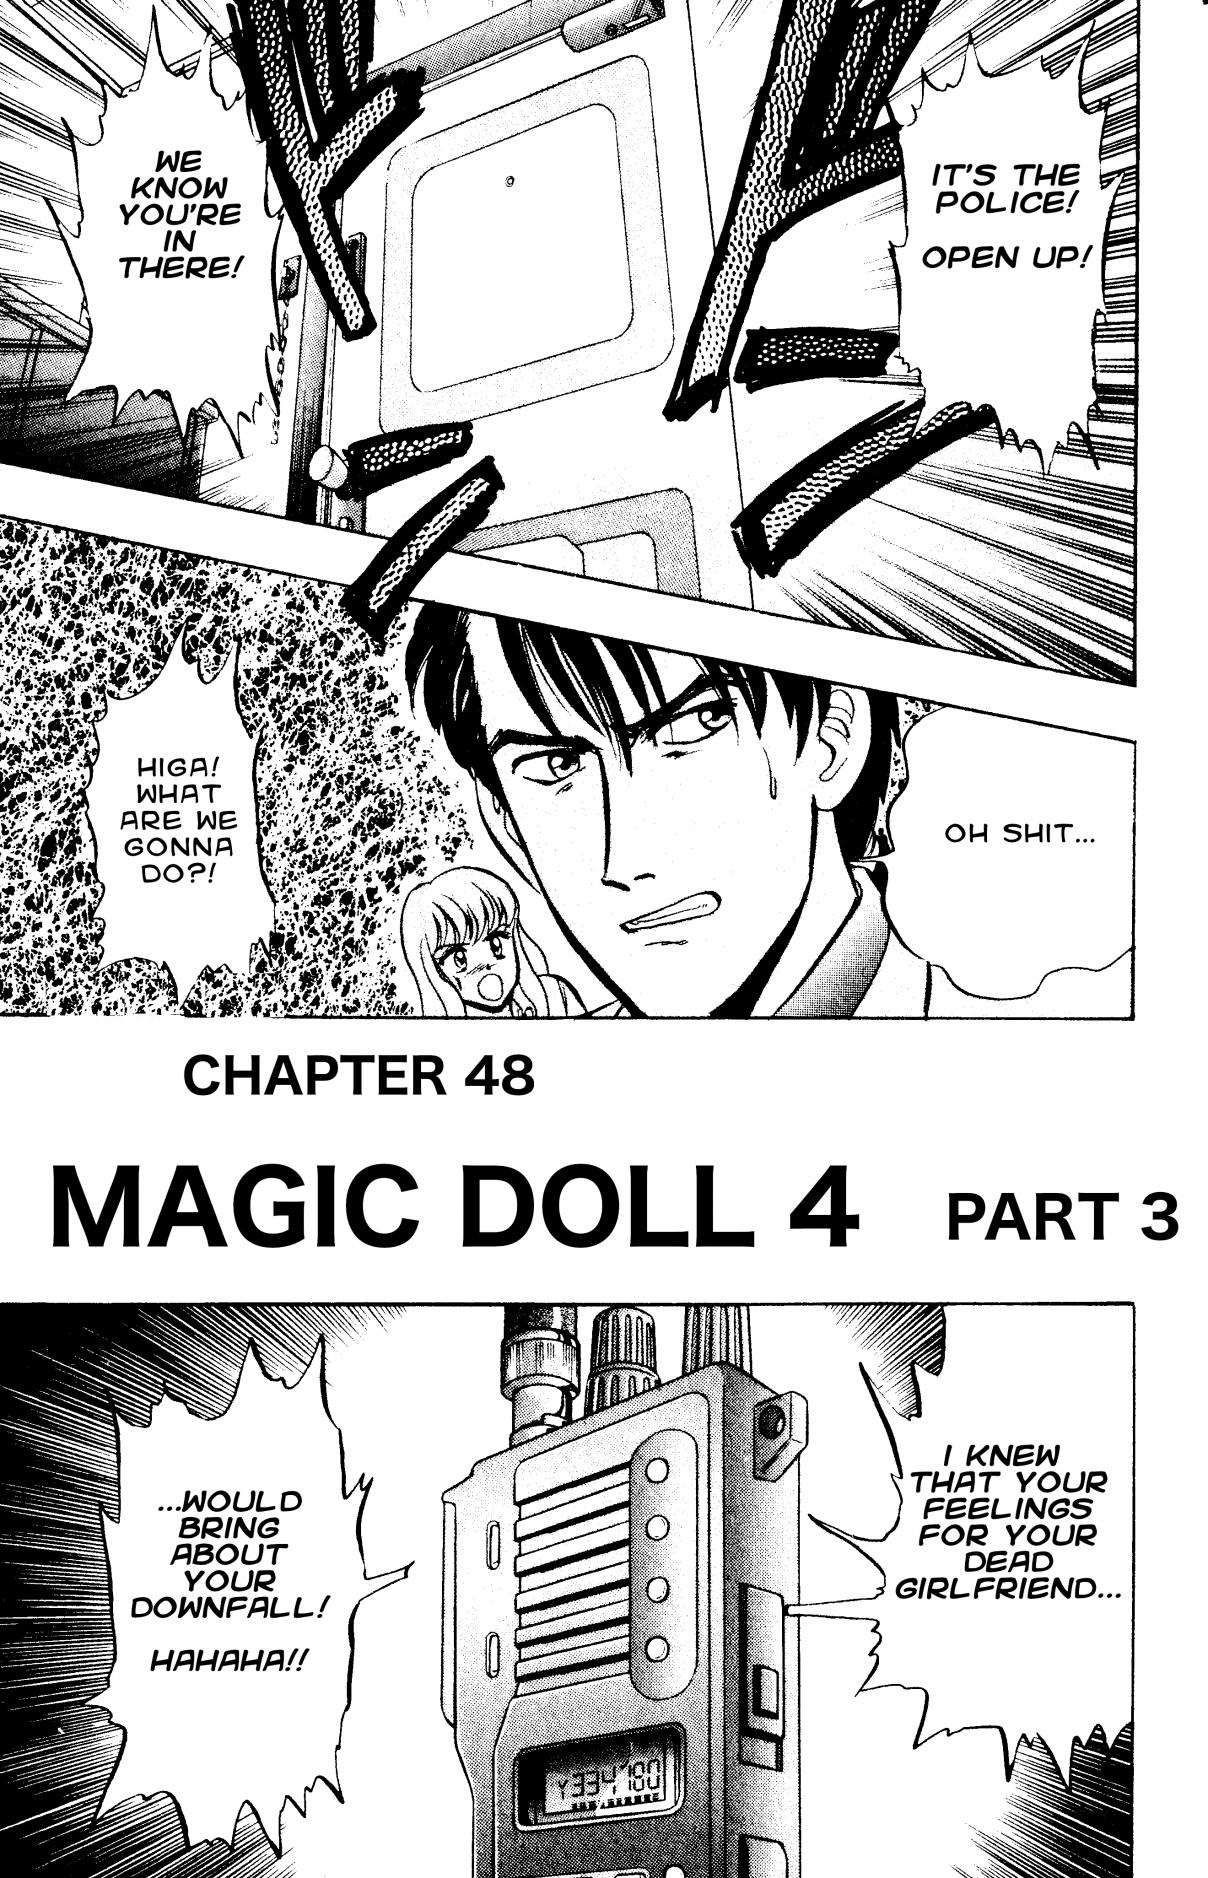 Outer Zone Vol. 7 Ch. 48 Magic Doll 4 (Part 3)